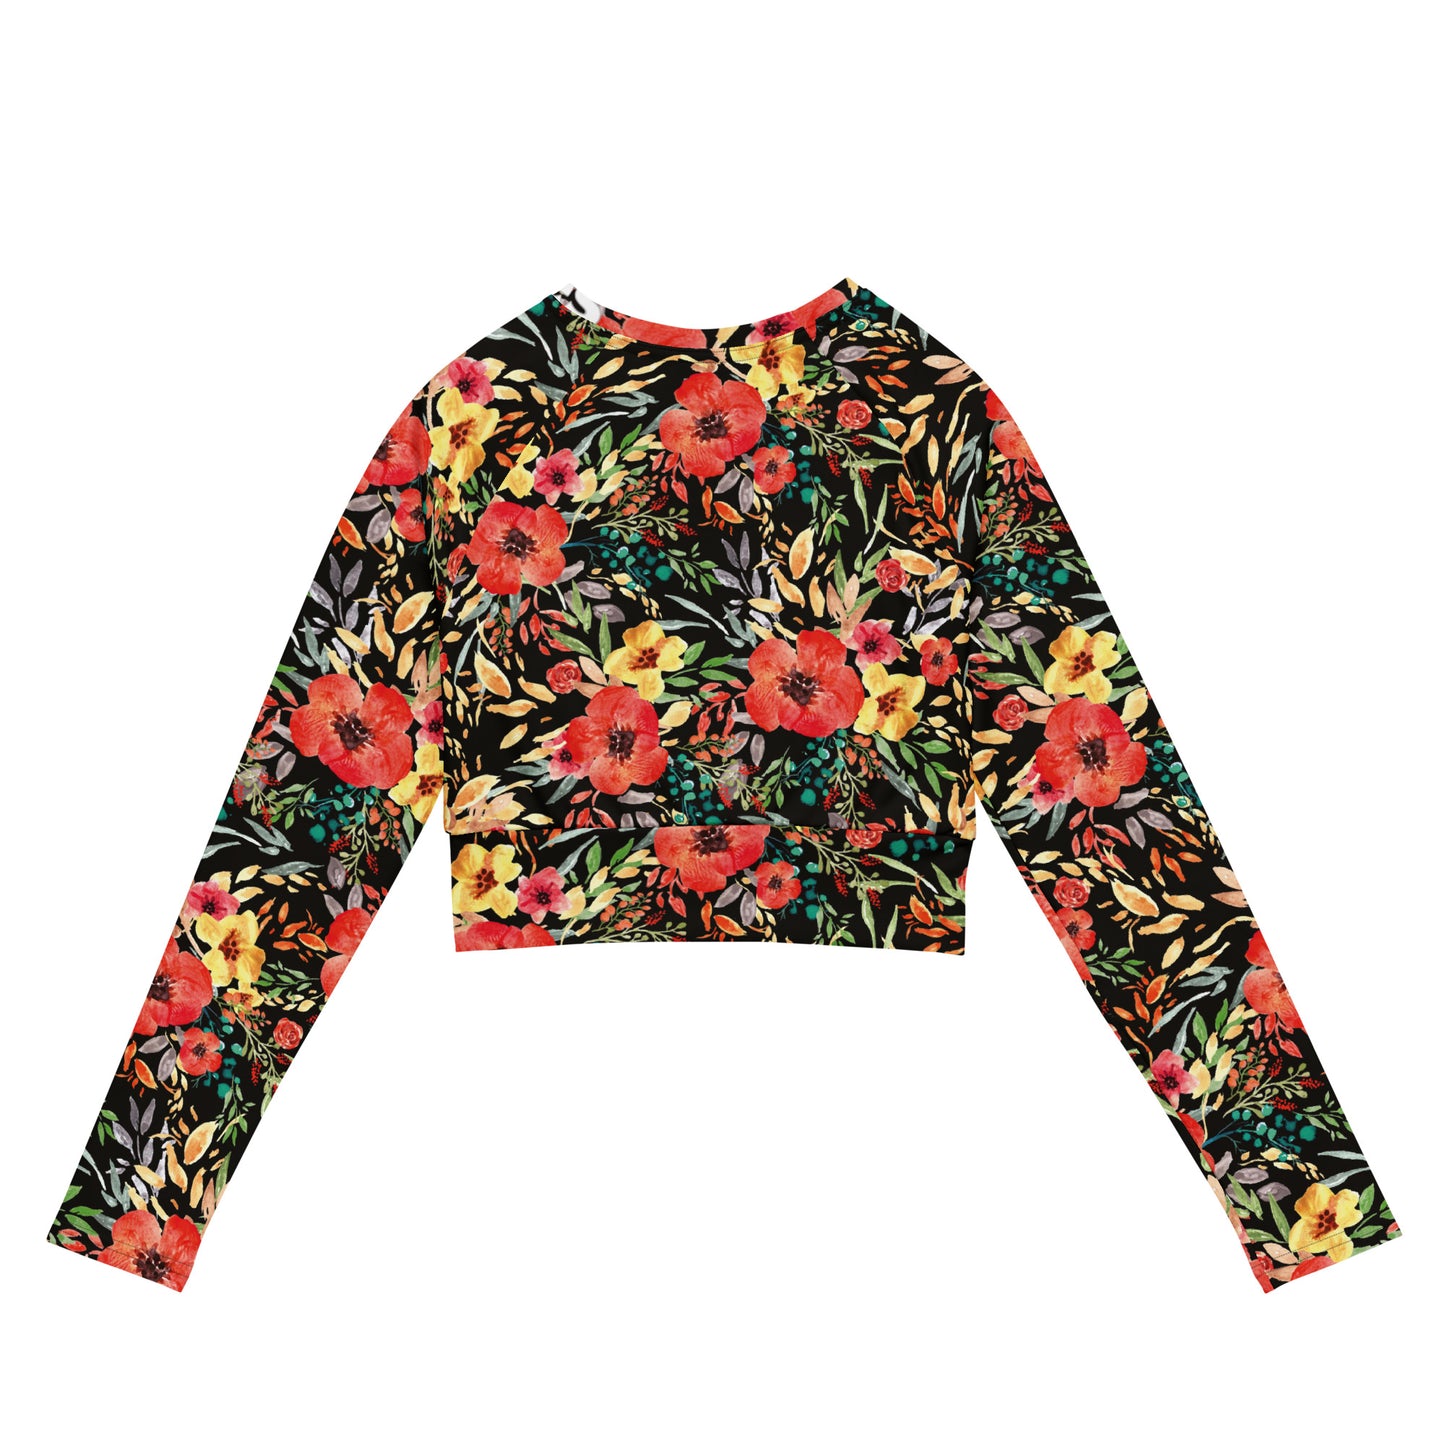 Recycled UPF 50+ long-sleeve crop top